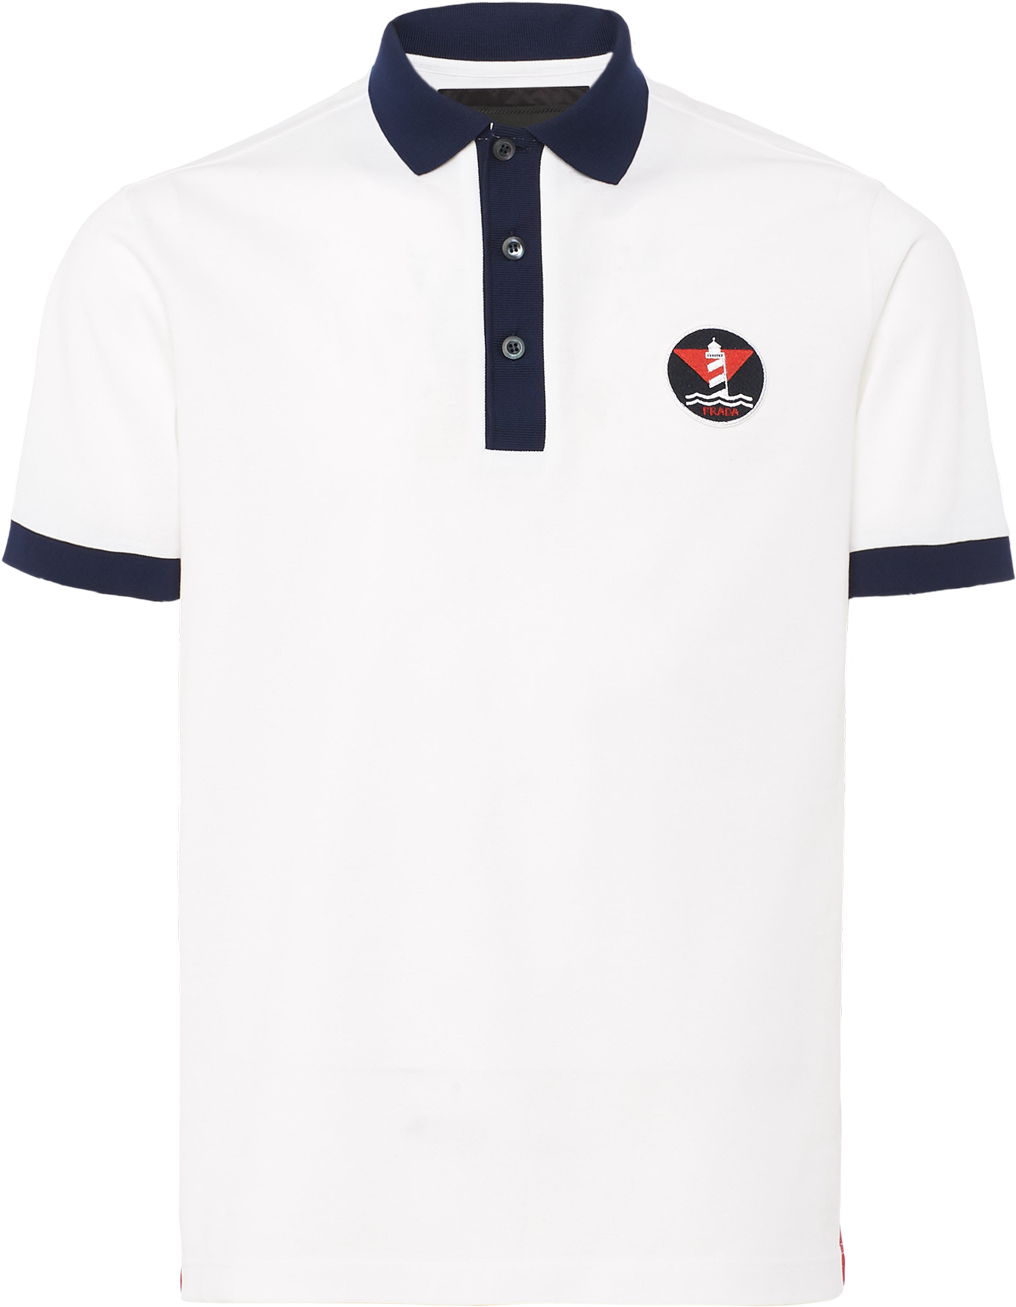 Download Polo Shirt PNG Image with No Background - PNGkey.com